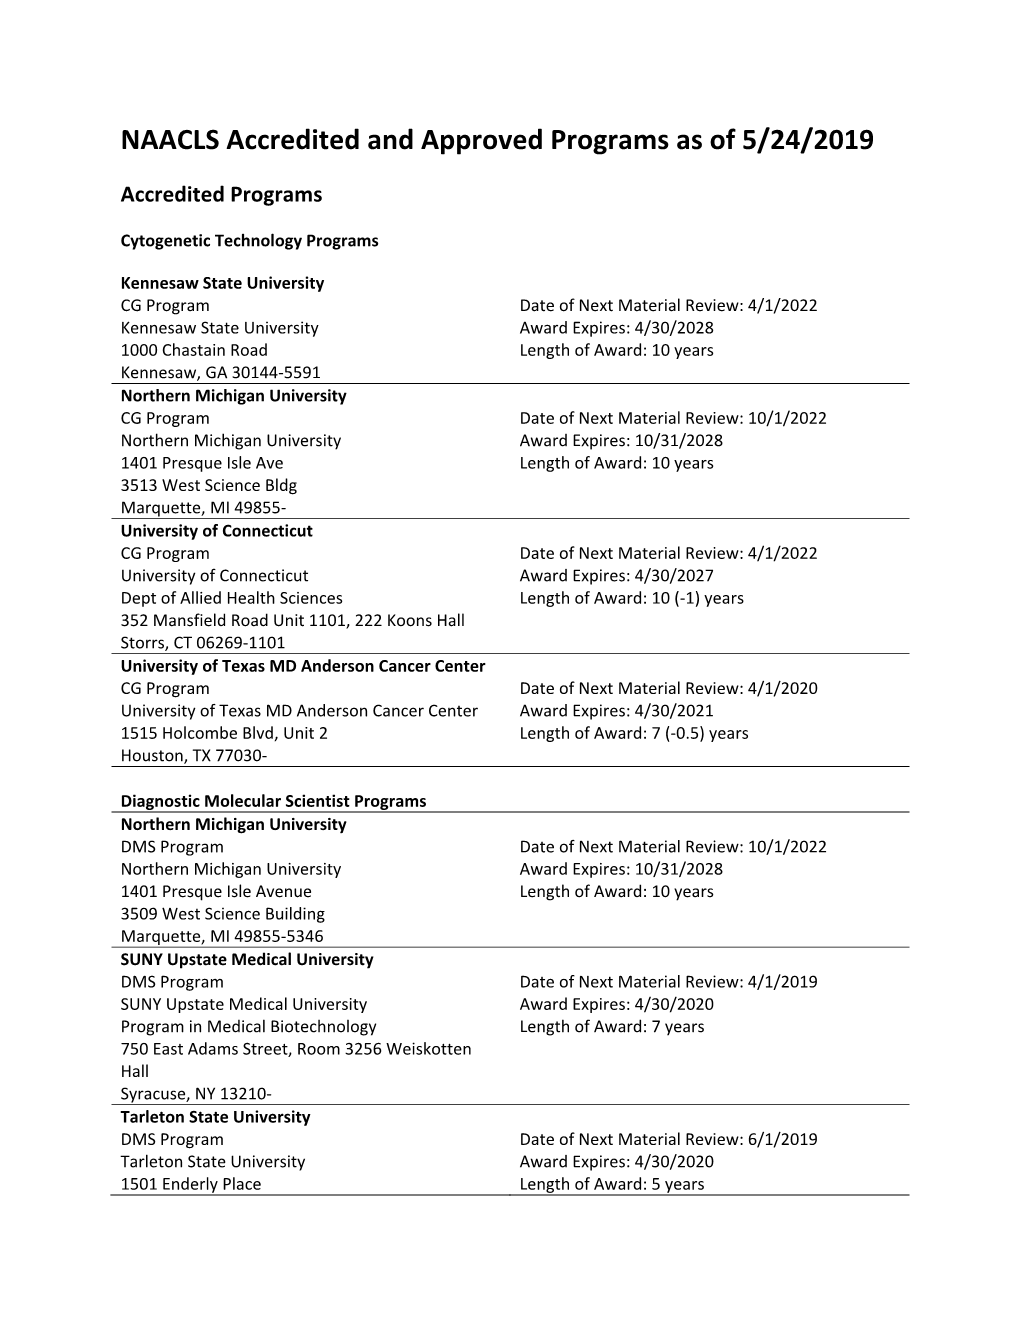 NAACLS Accredited and Approved Programs As of 5/24/2019